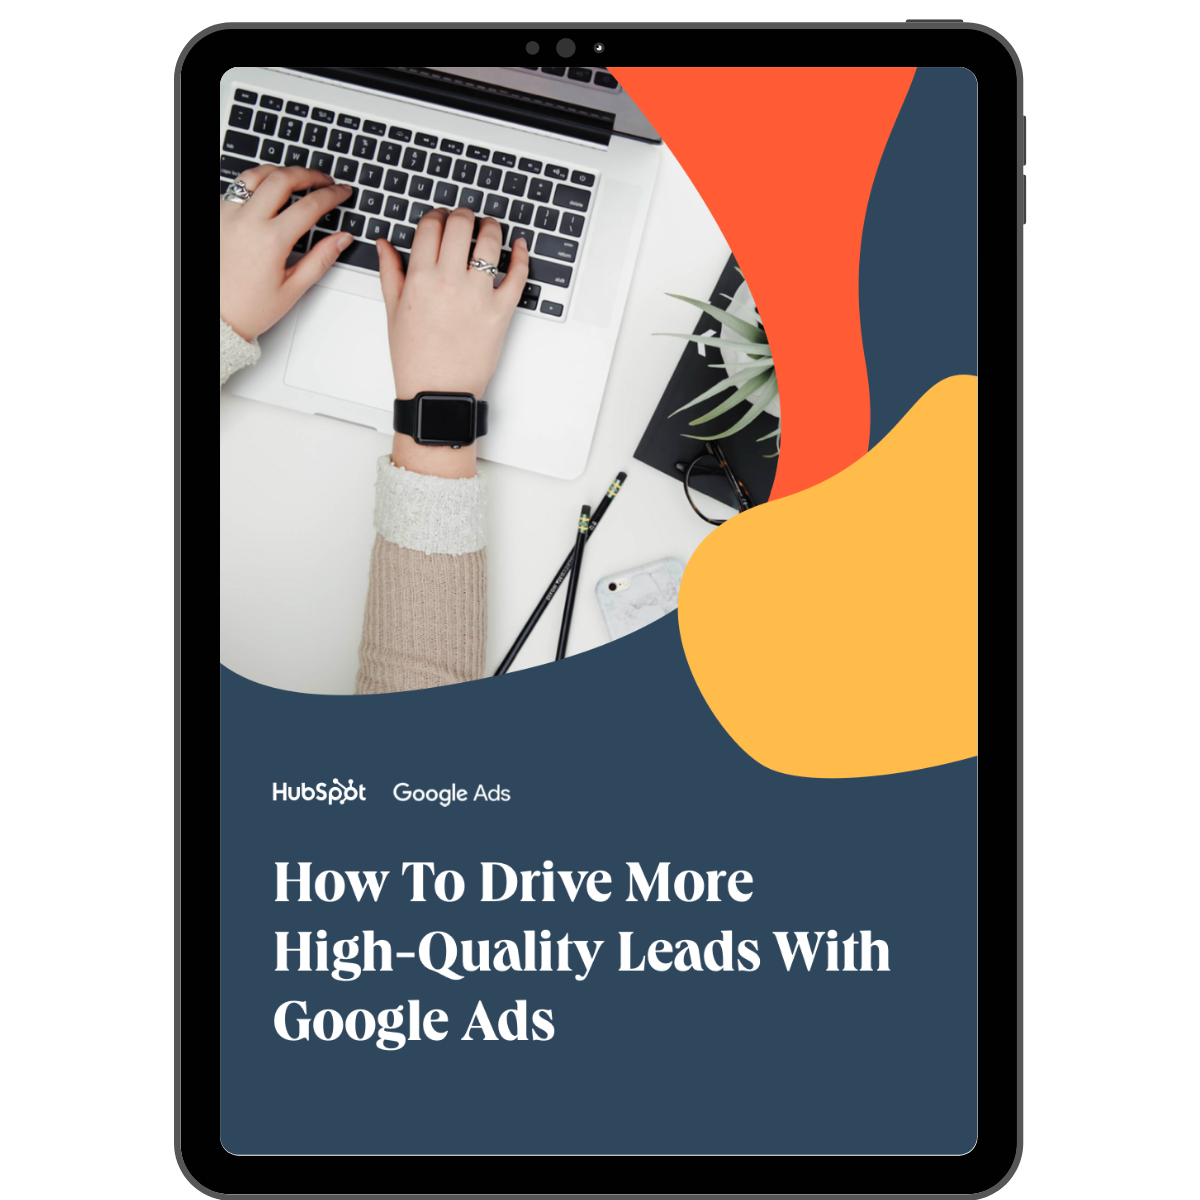 How do I get high quality leads from Google Ads?